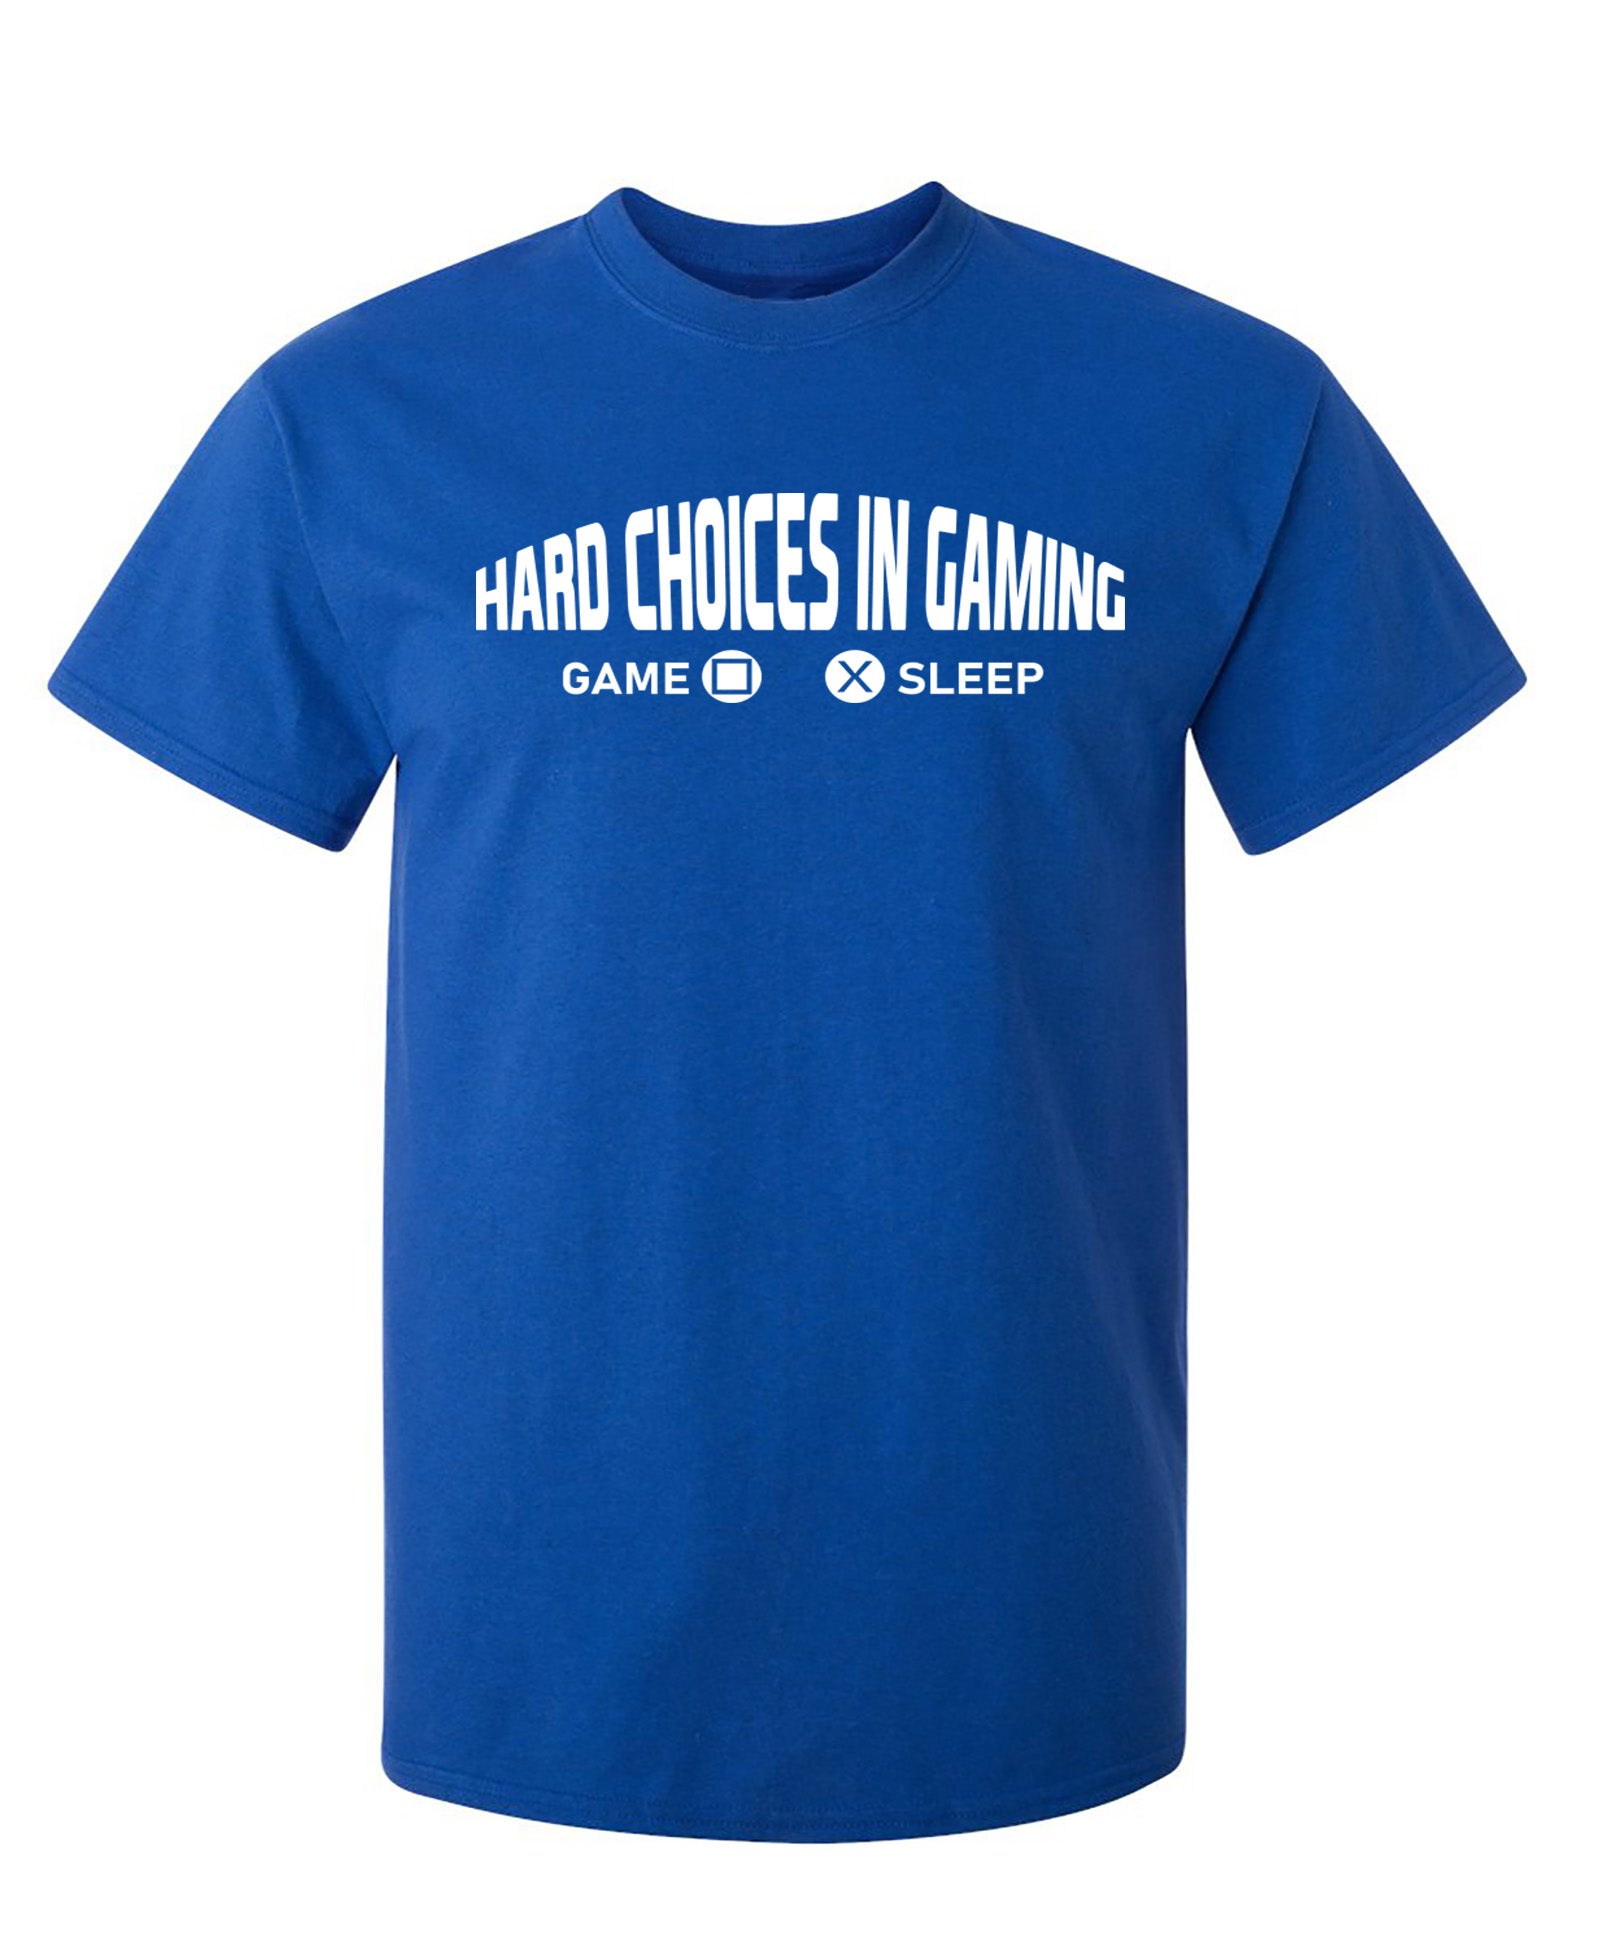 Hard Choices In Gaming - Funny T Shirts & Graphic Tees